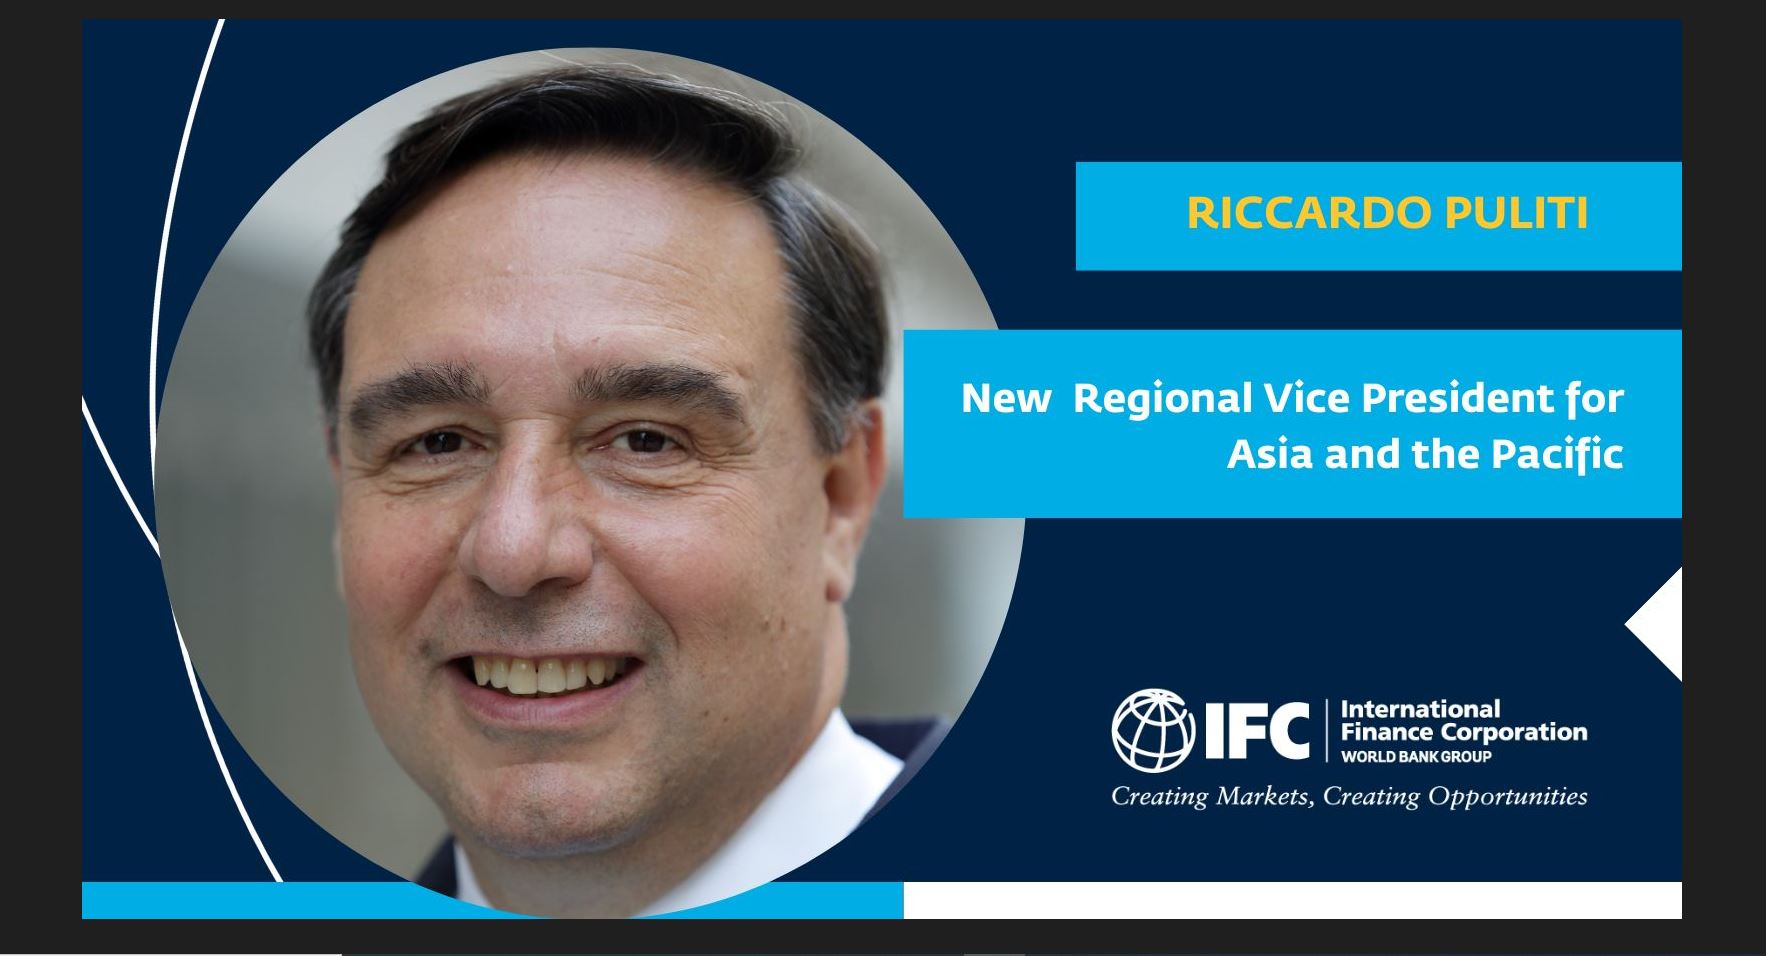 <strong>Addressing Multiple Crises Amid Economic Slowdown Key Priority for New Regional Vice President for Asia and the Pacific</strong>